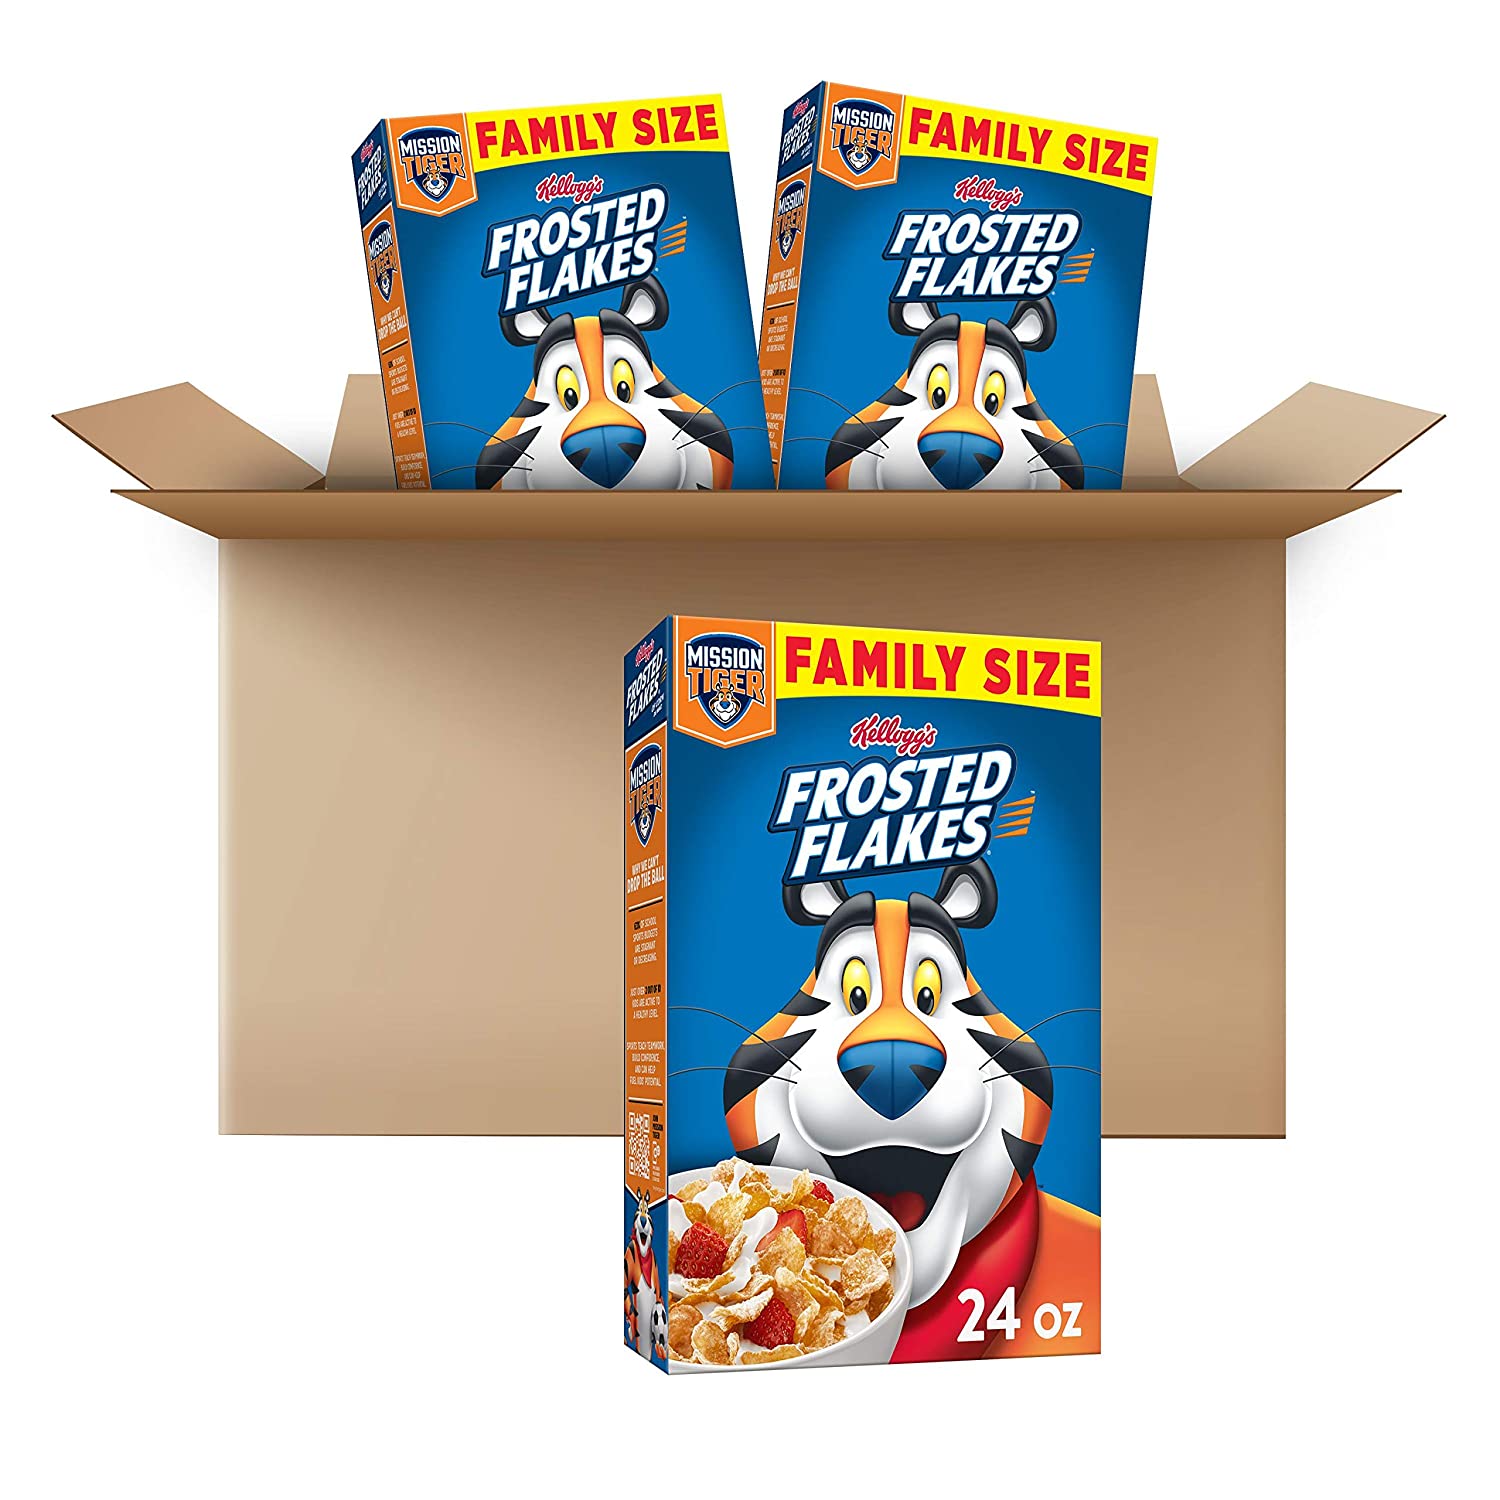 Kellogg's Frosted Flakes Breakfast Cereal, Original, Excellent